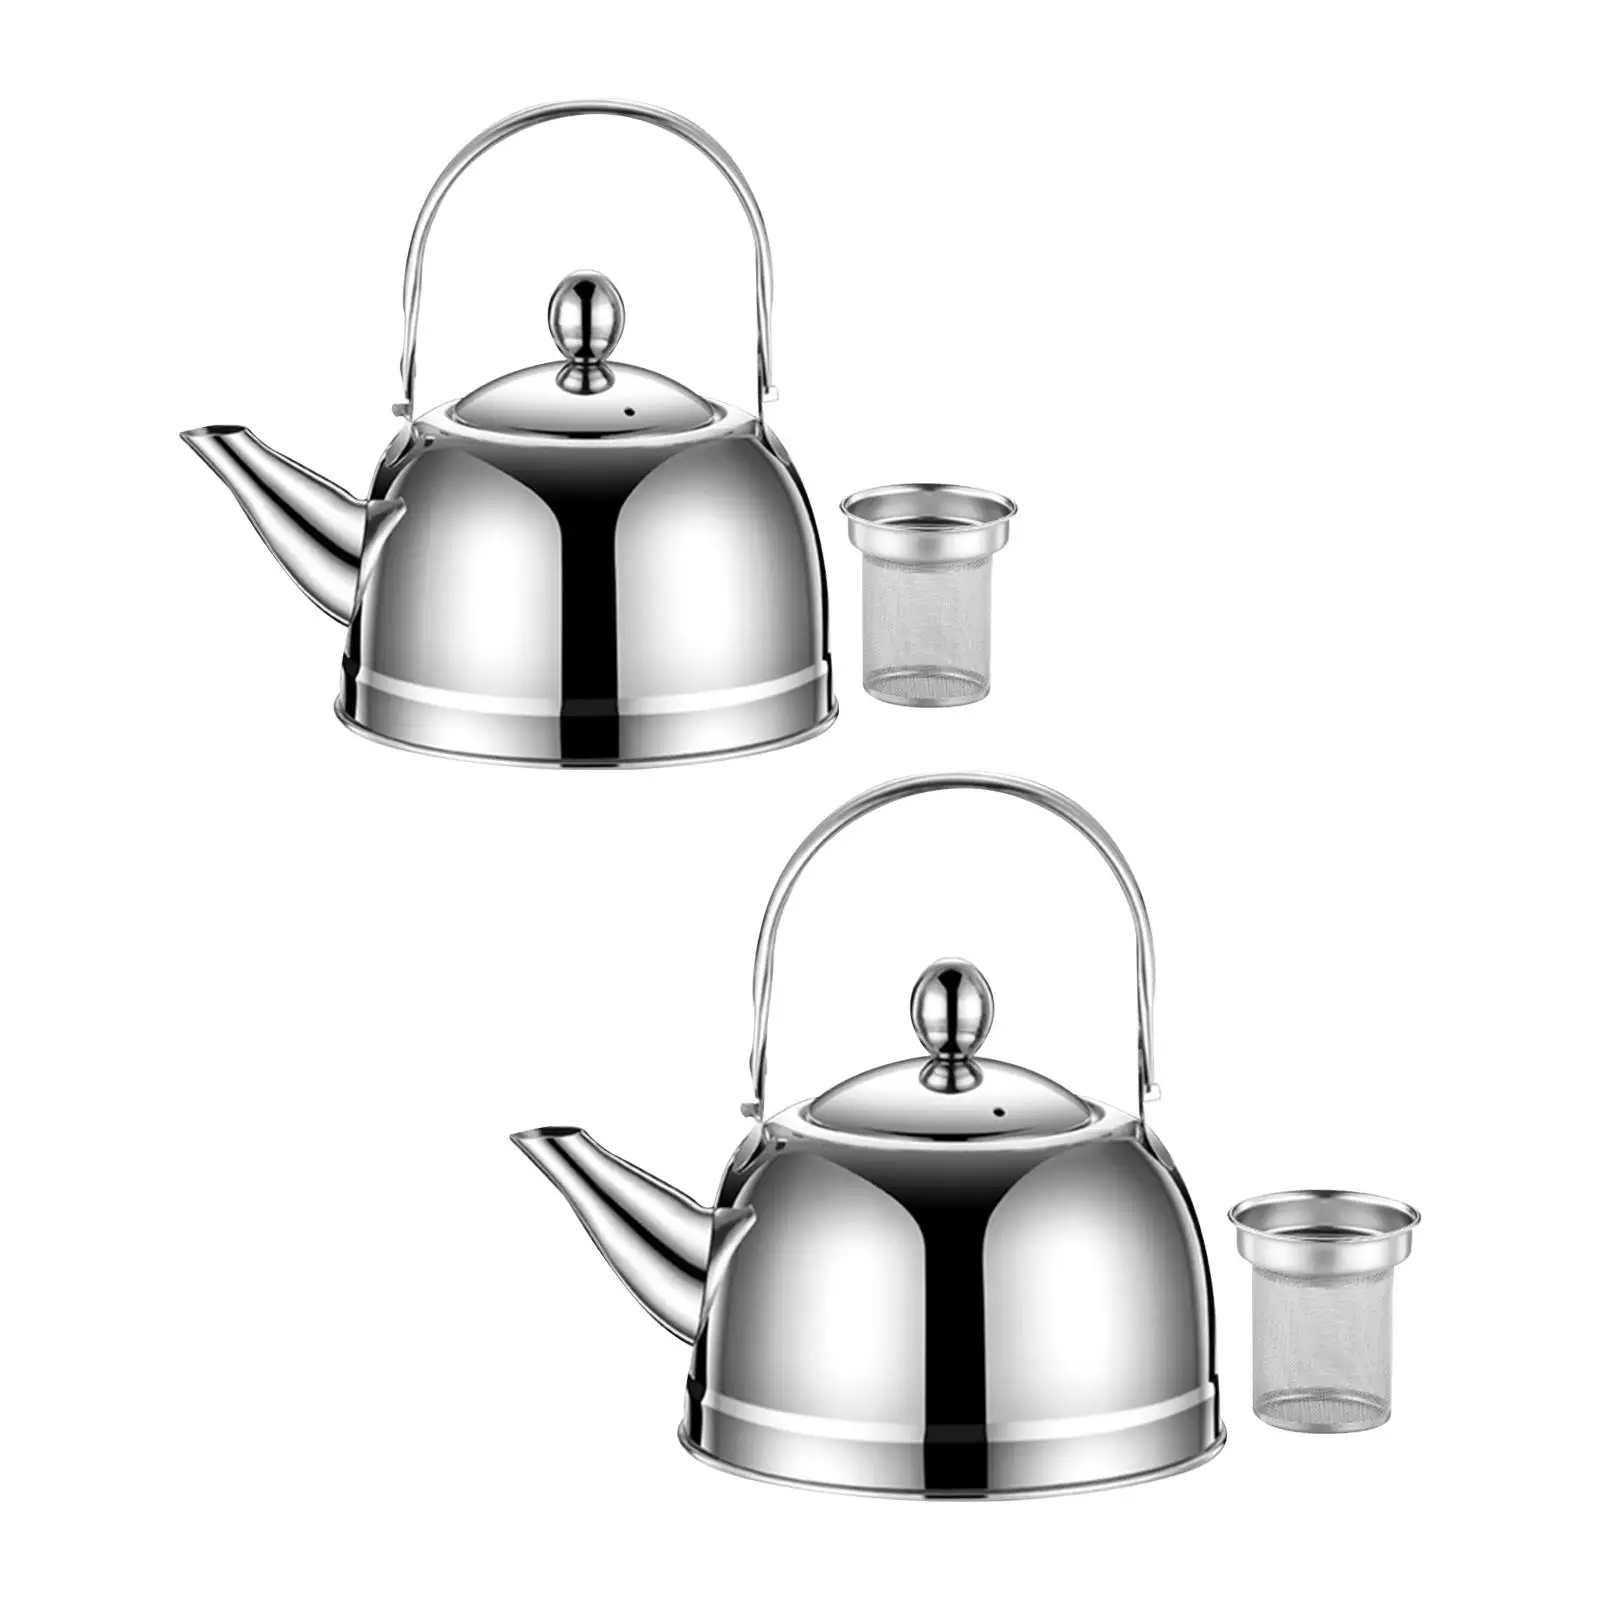 Portable Tea Kettle with Removable Infuser Teapots Water Pot Large Capacity for Picnic Hiking Restaurant